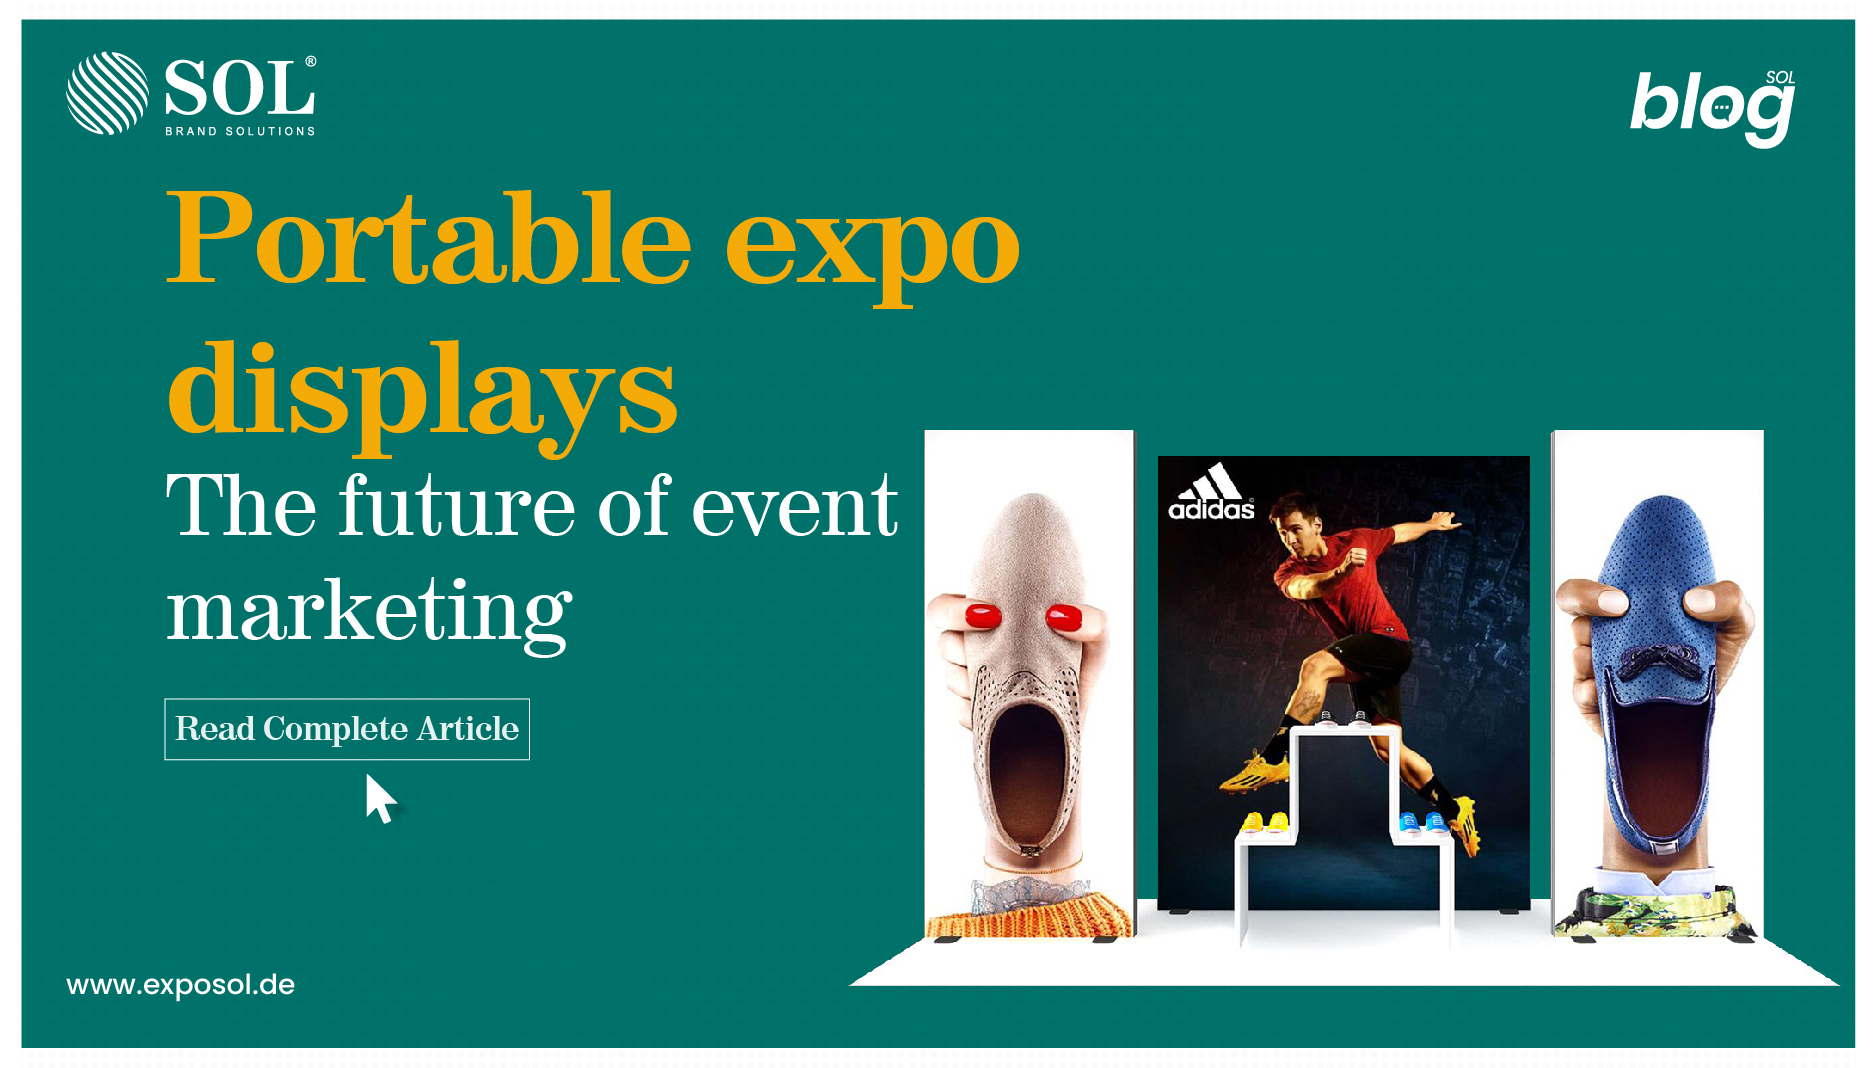 PORTABLE EXPO DISPLAYS: THE FUTURE OF EVENT MARKETING